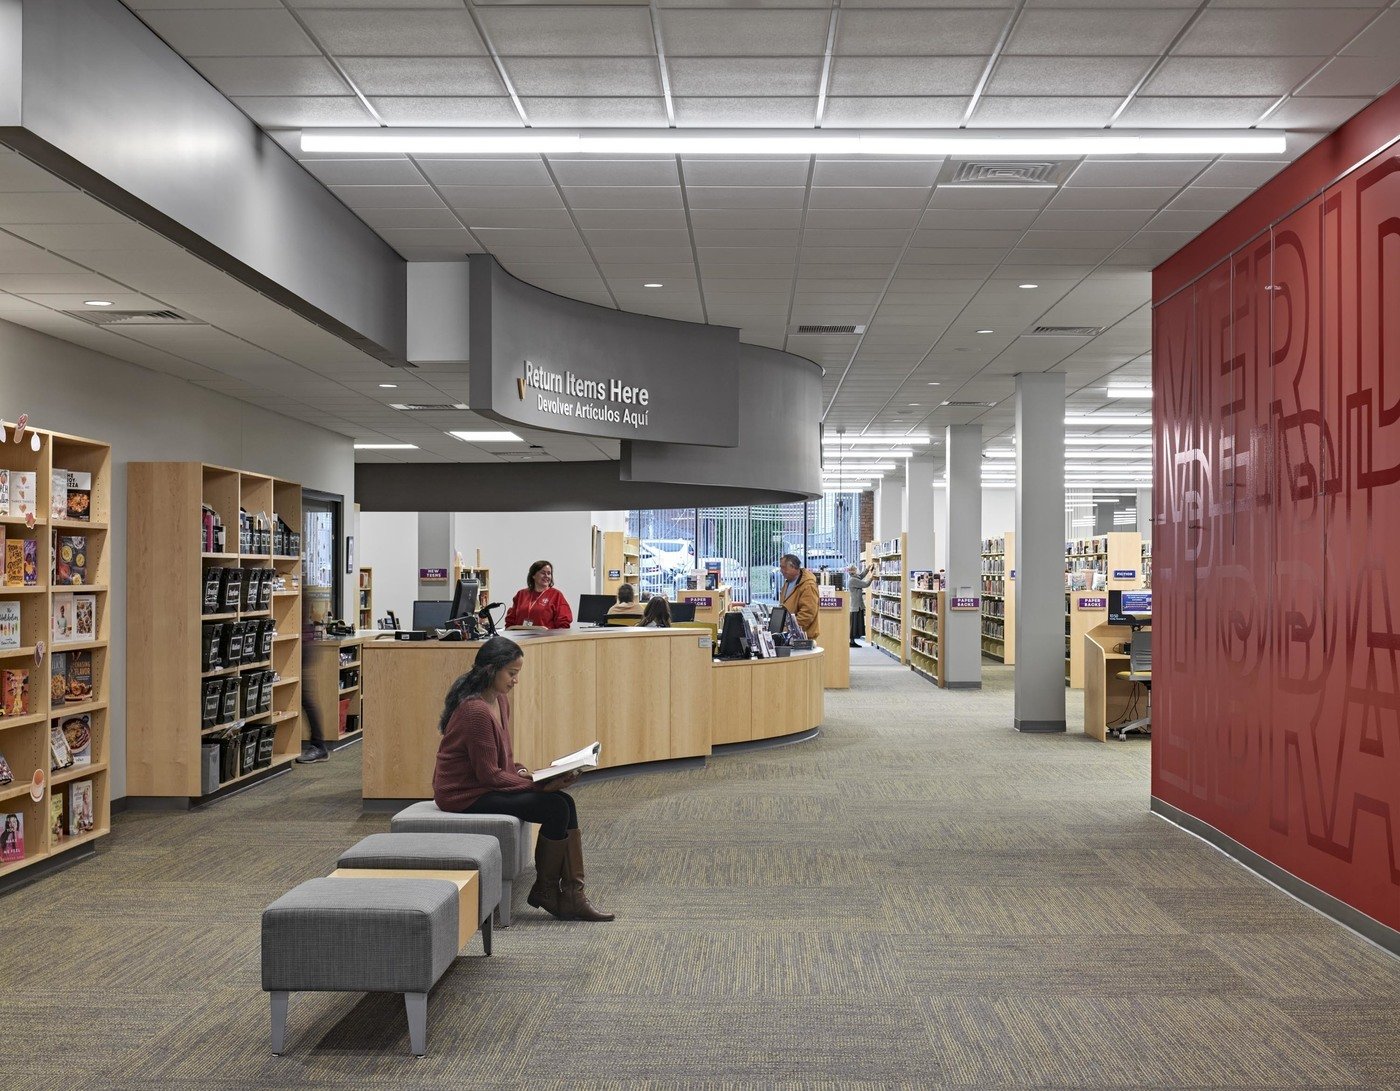 5 tskp meriden public library connecticut interior seating area graphic wall 1400 0x0x3000x2337 q85